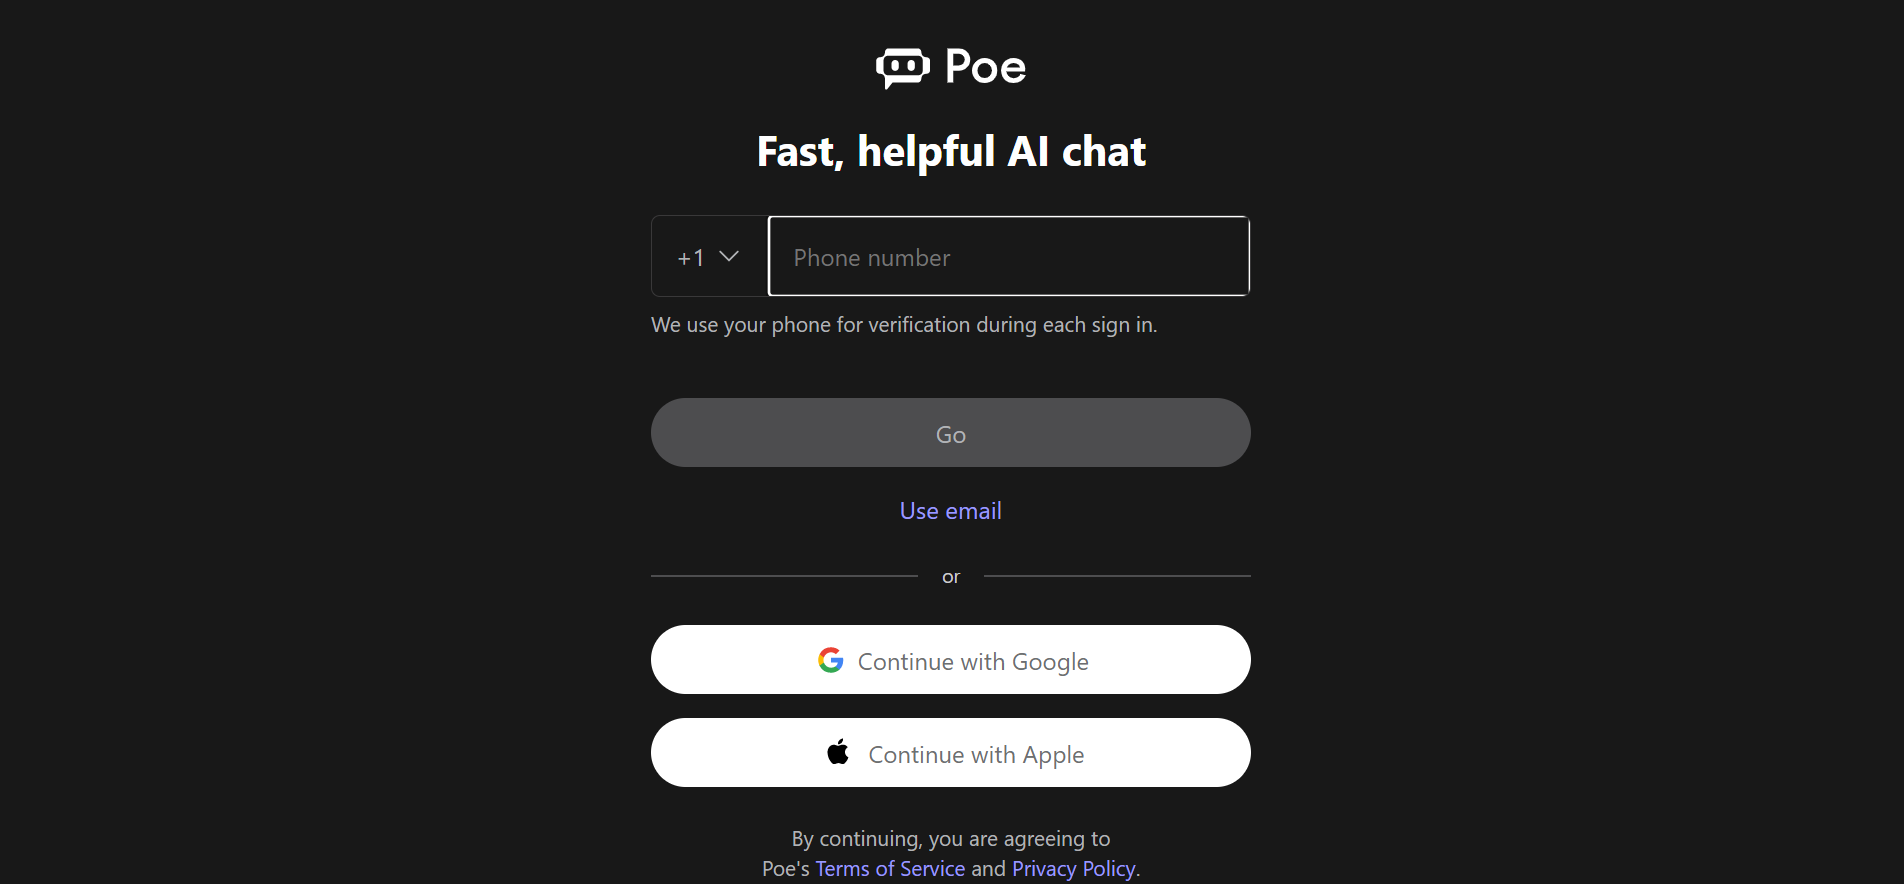 Stop Googling: Poe.com Has All the Answers You Need!